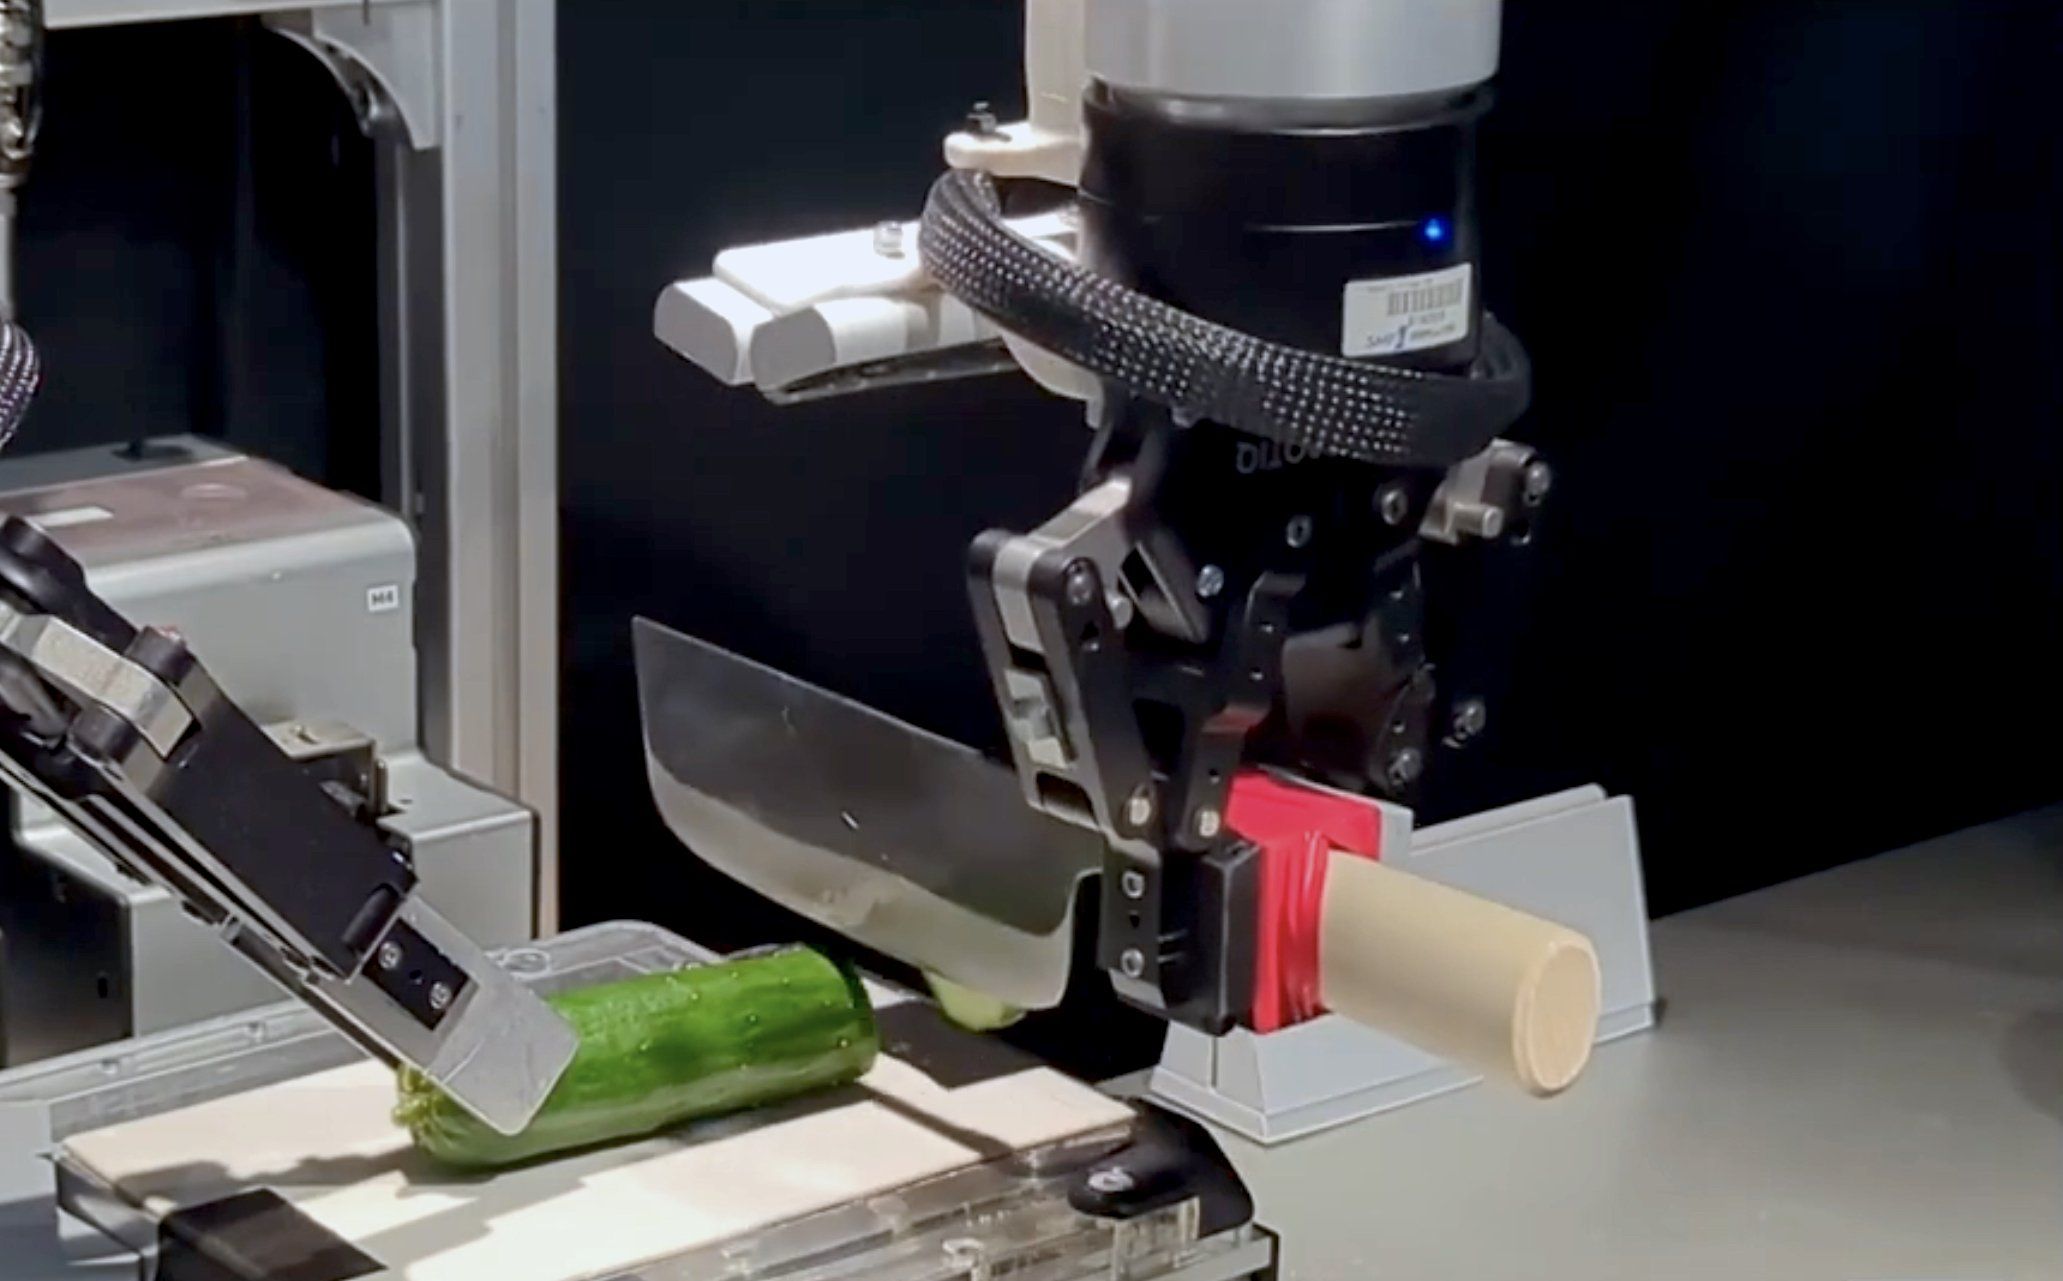 A robotic hand uses a kitchen knife to slice a cucumber.